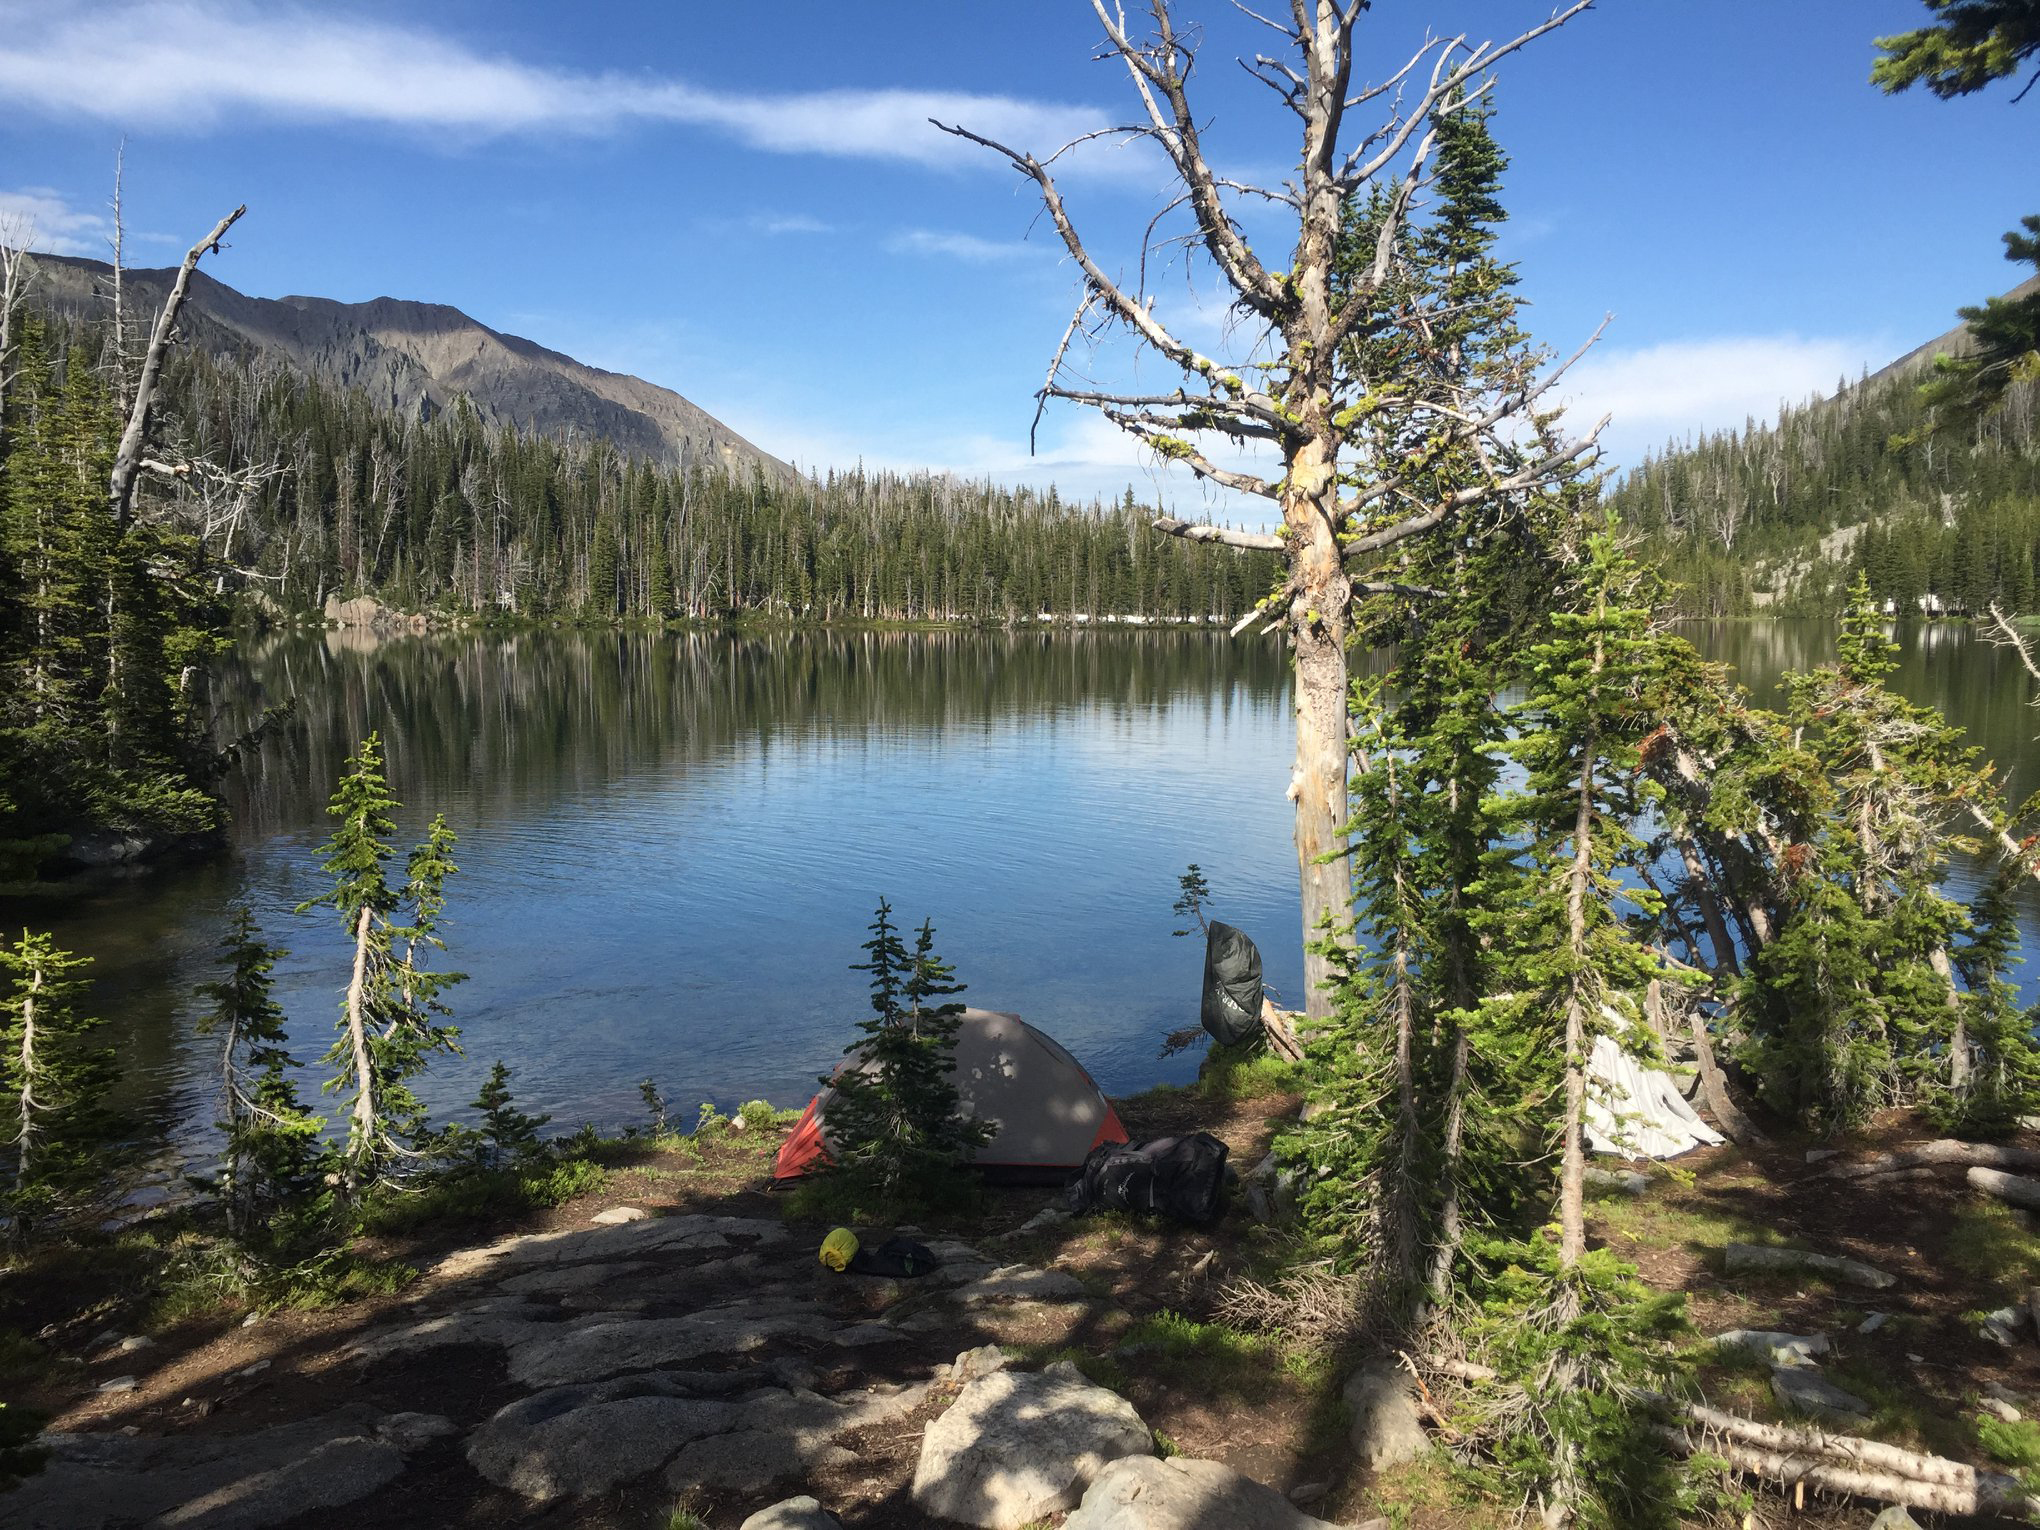 Photo Contest Winner, Youth 3rd place: Blue Lake in the Crazy mountains. David M., Troop 1, Great Falls.